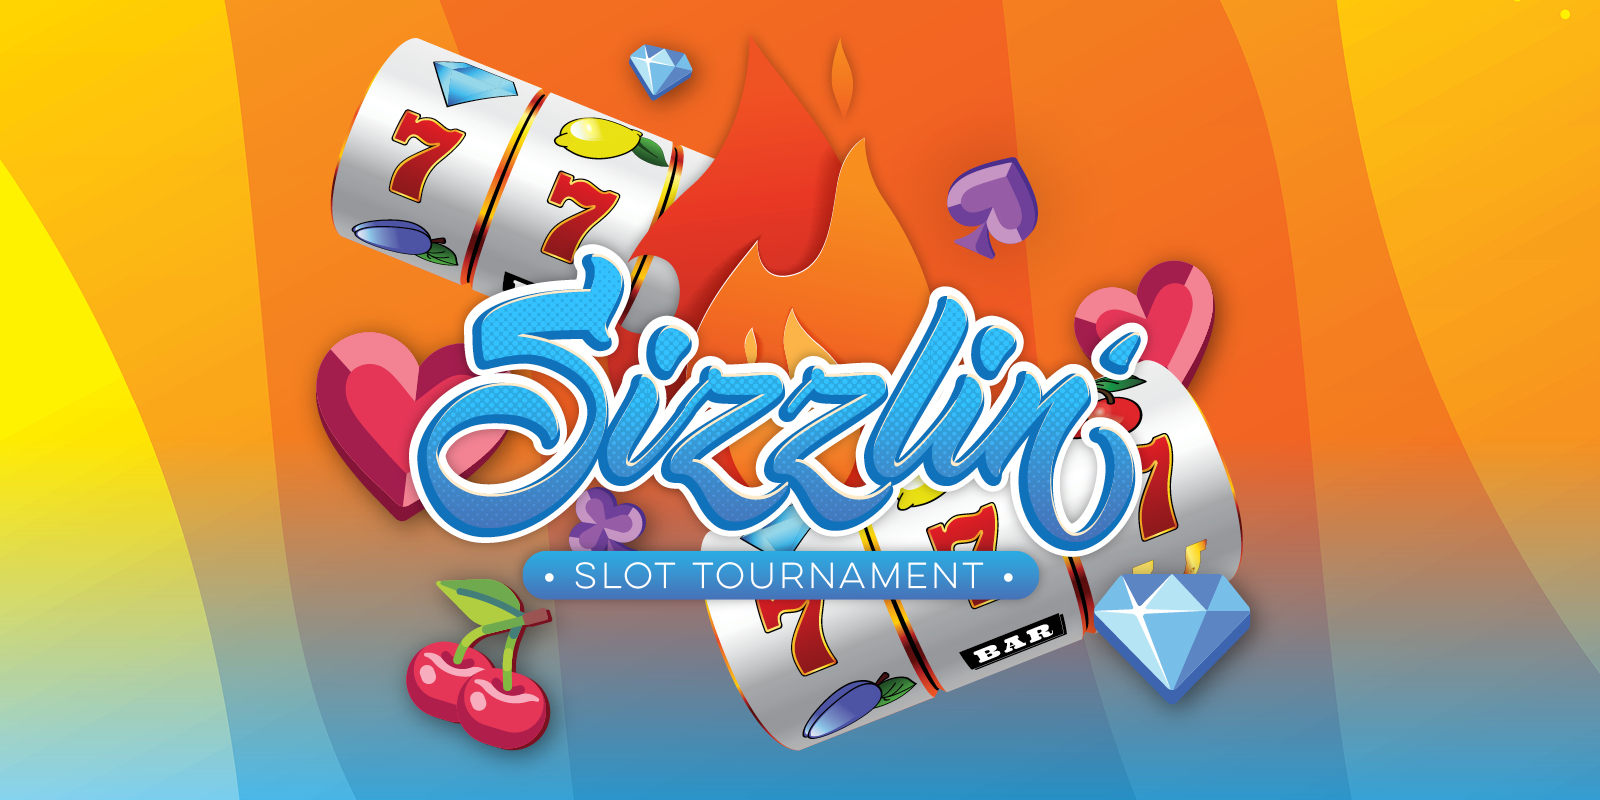 Creative for Sizzlin' Slot Tournament in September showing 7's on reelse diamons and cherries falling from the sky with a bright and vibrant summer vibe